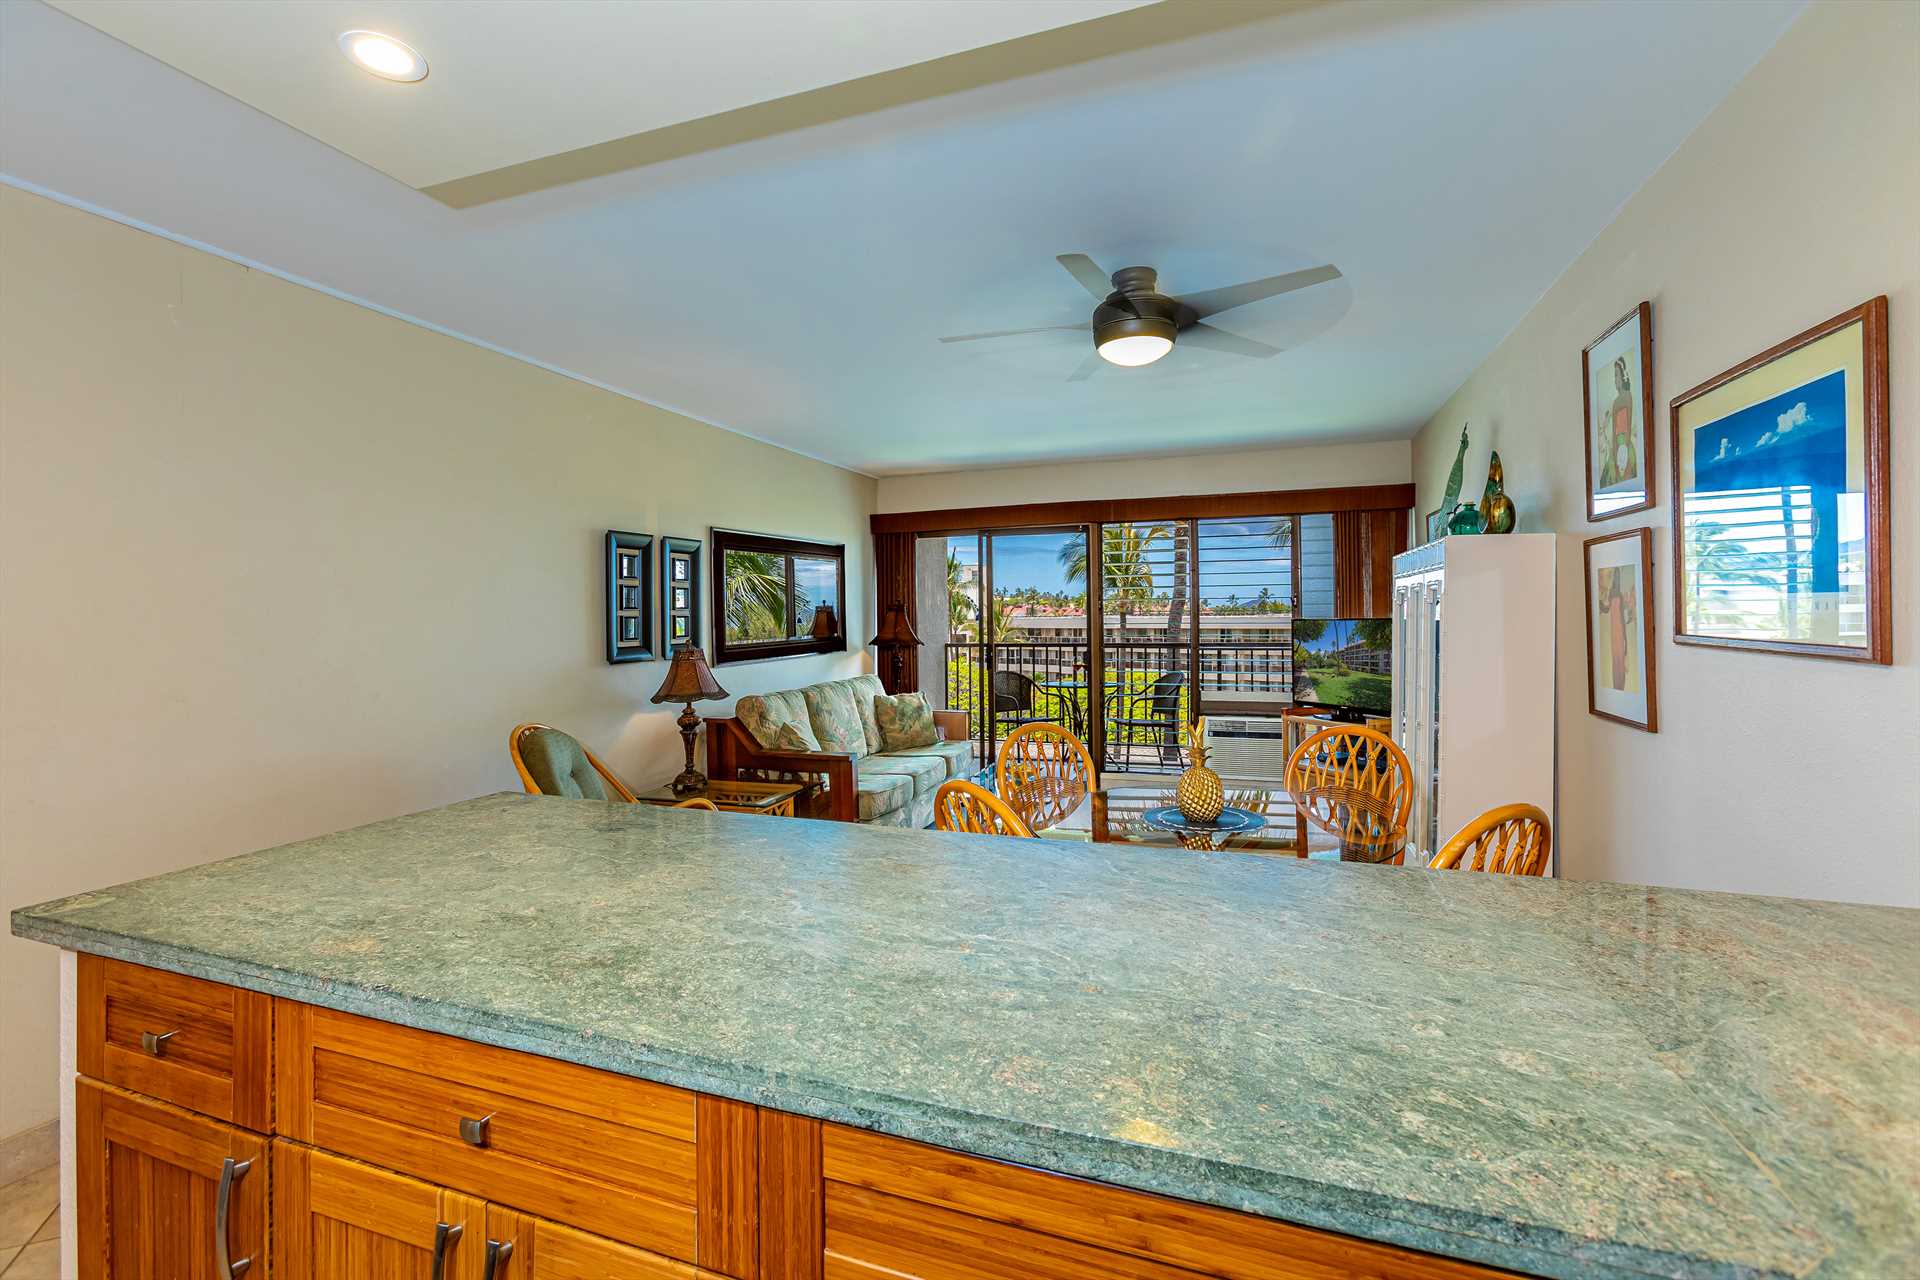 Beautiful, well-appointed kitchen with a view